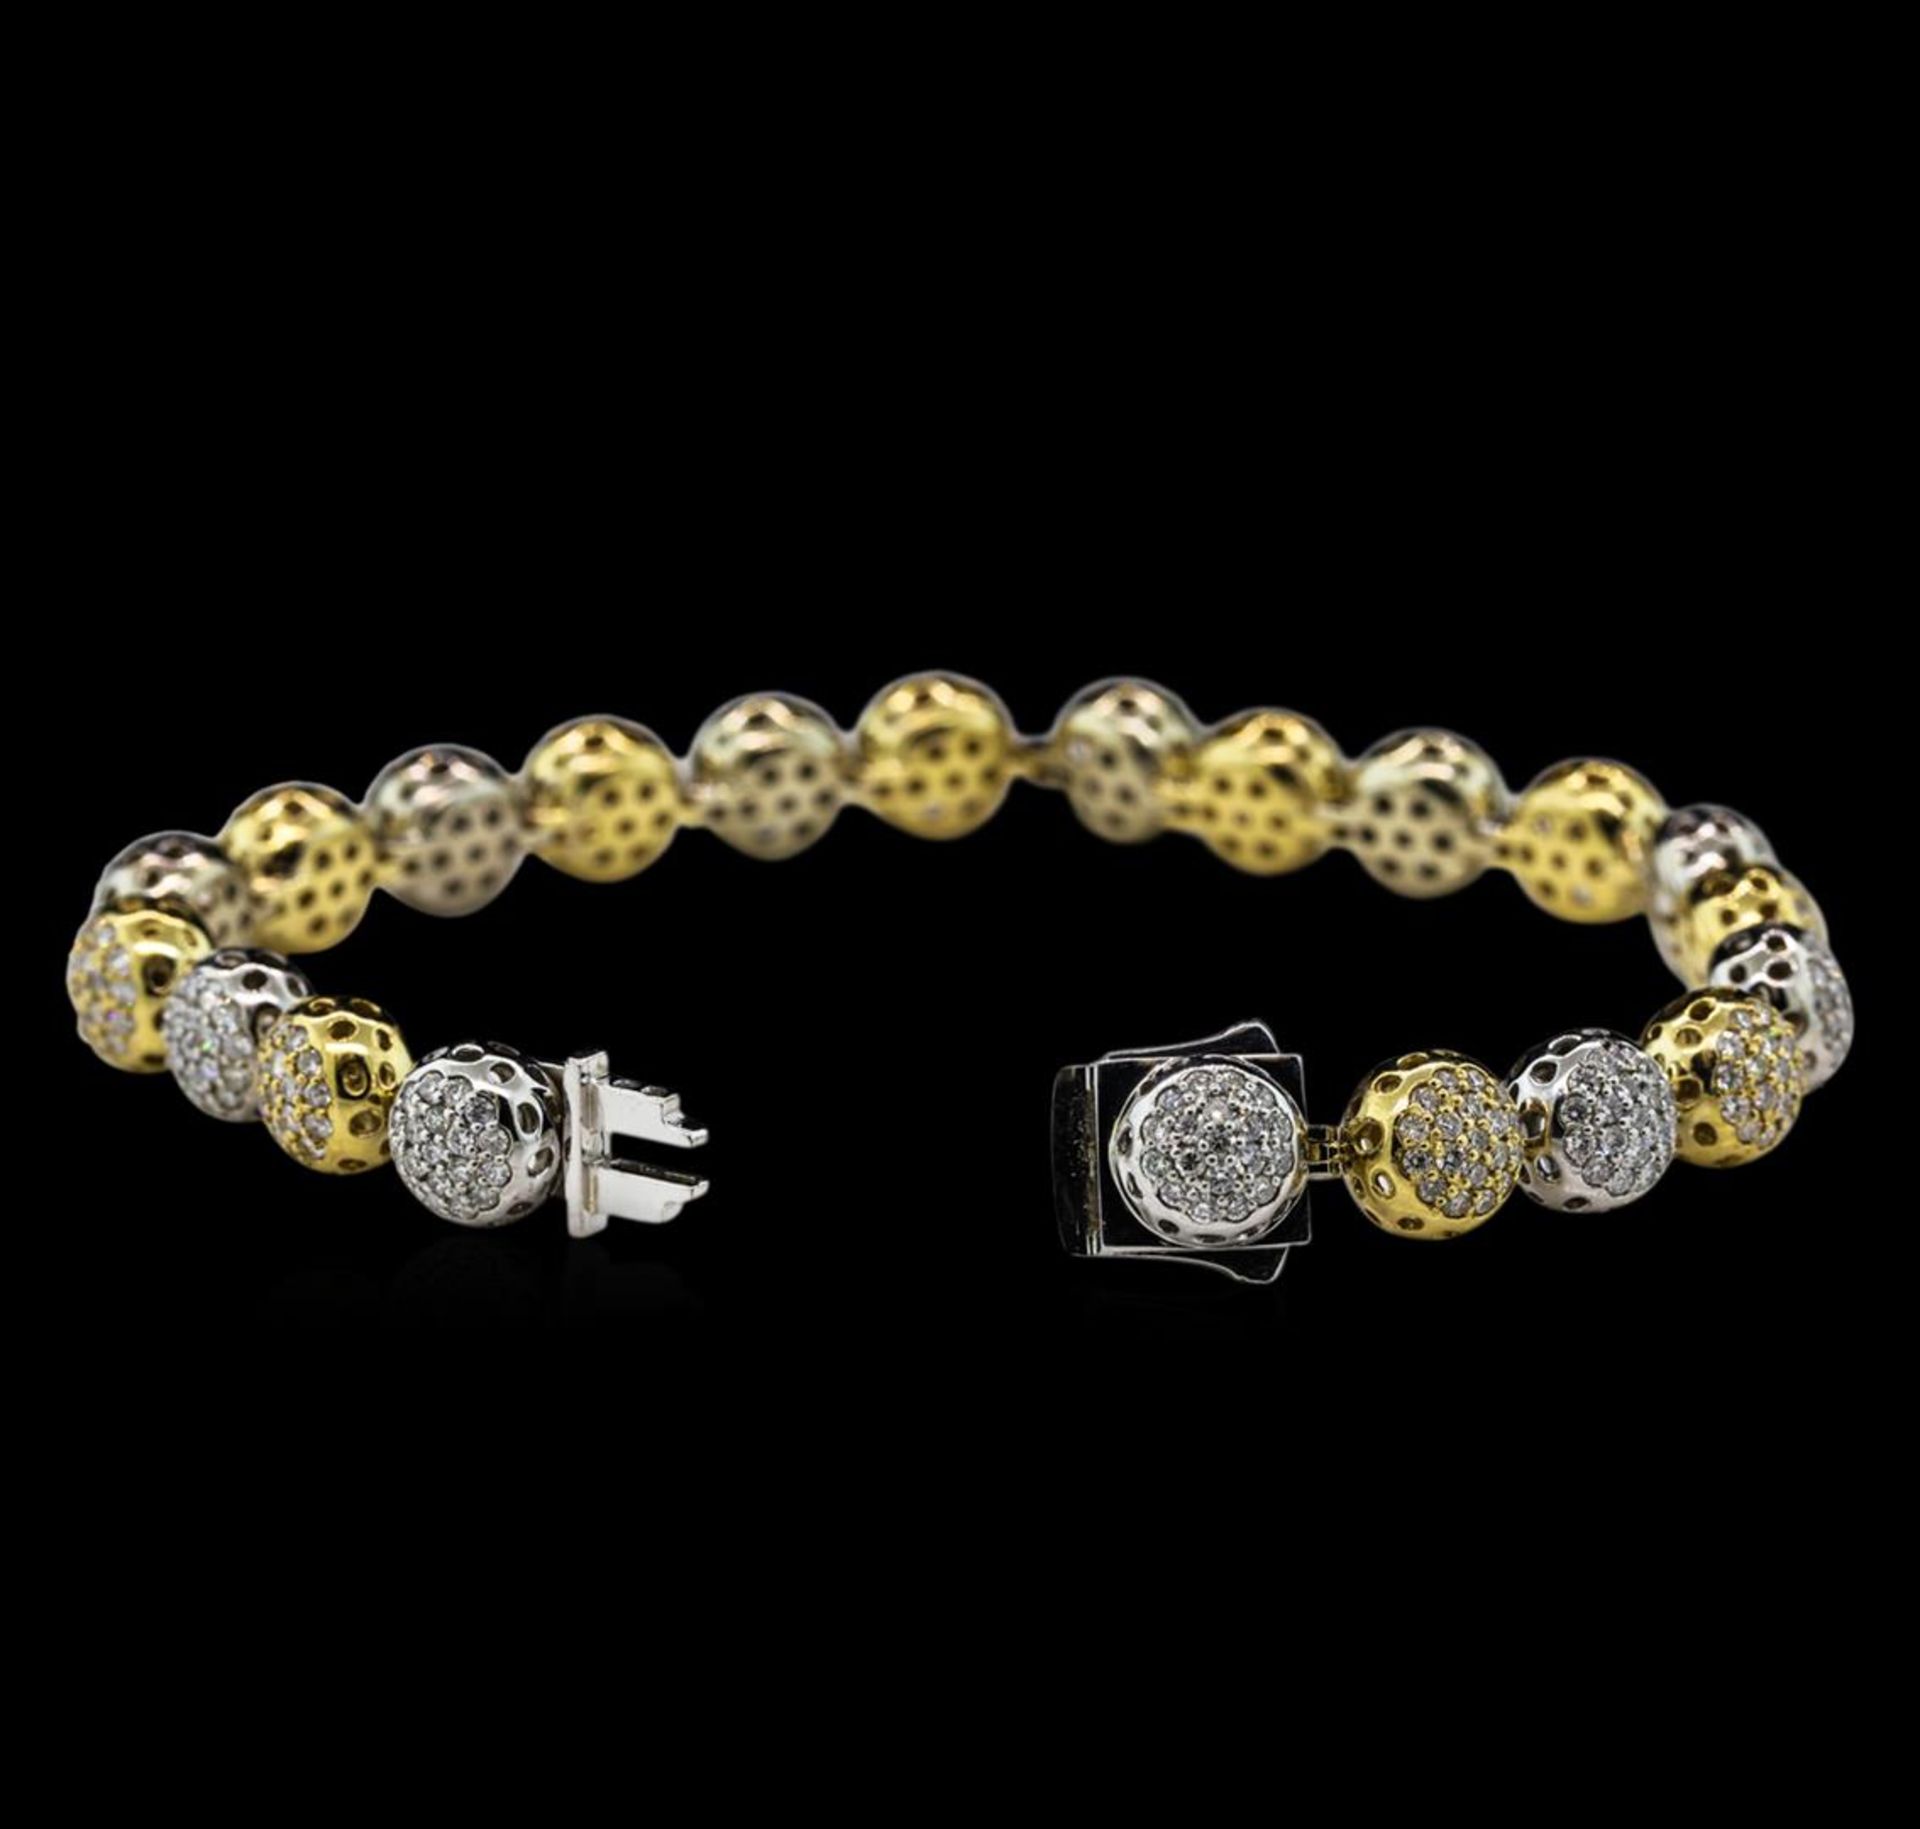 3.35 ctw Diamond Bracelet - 14KT White and Yellow Gold - Image 3 of 4